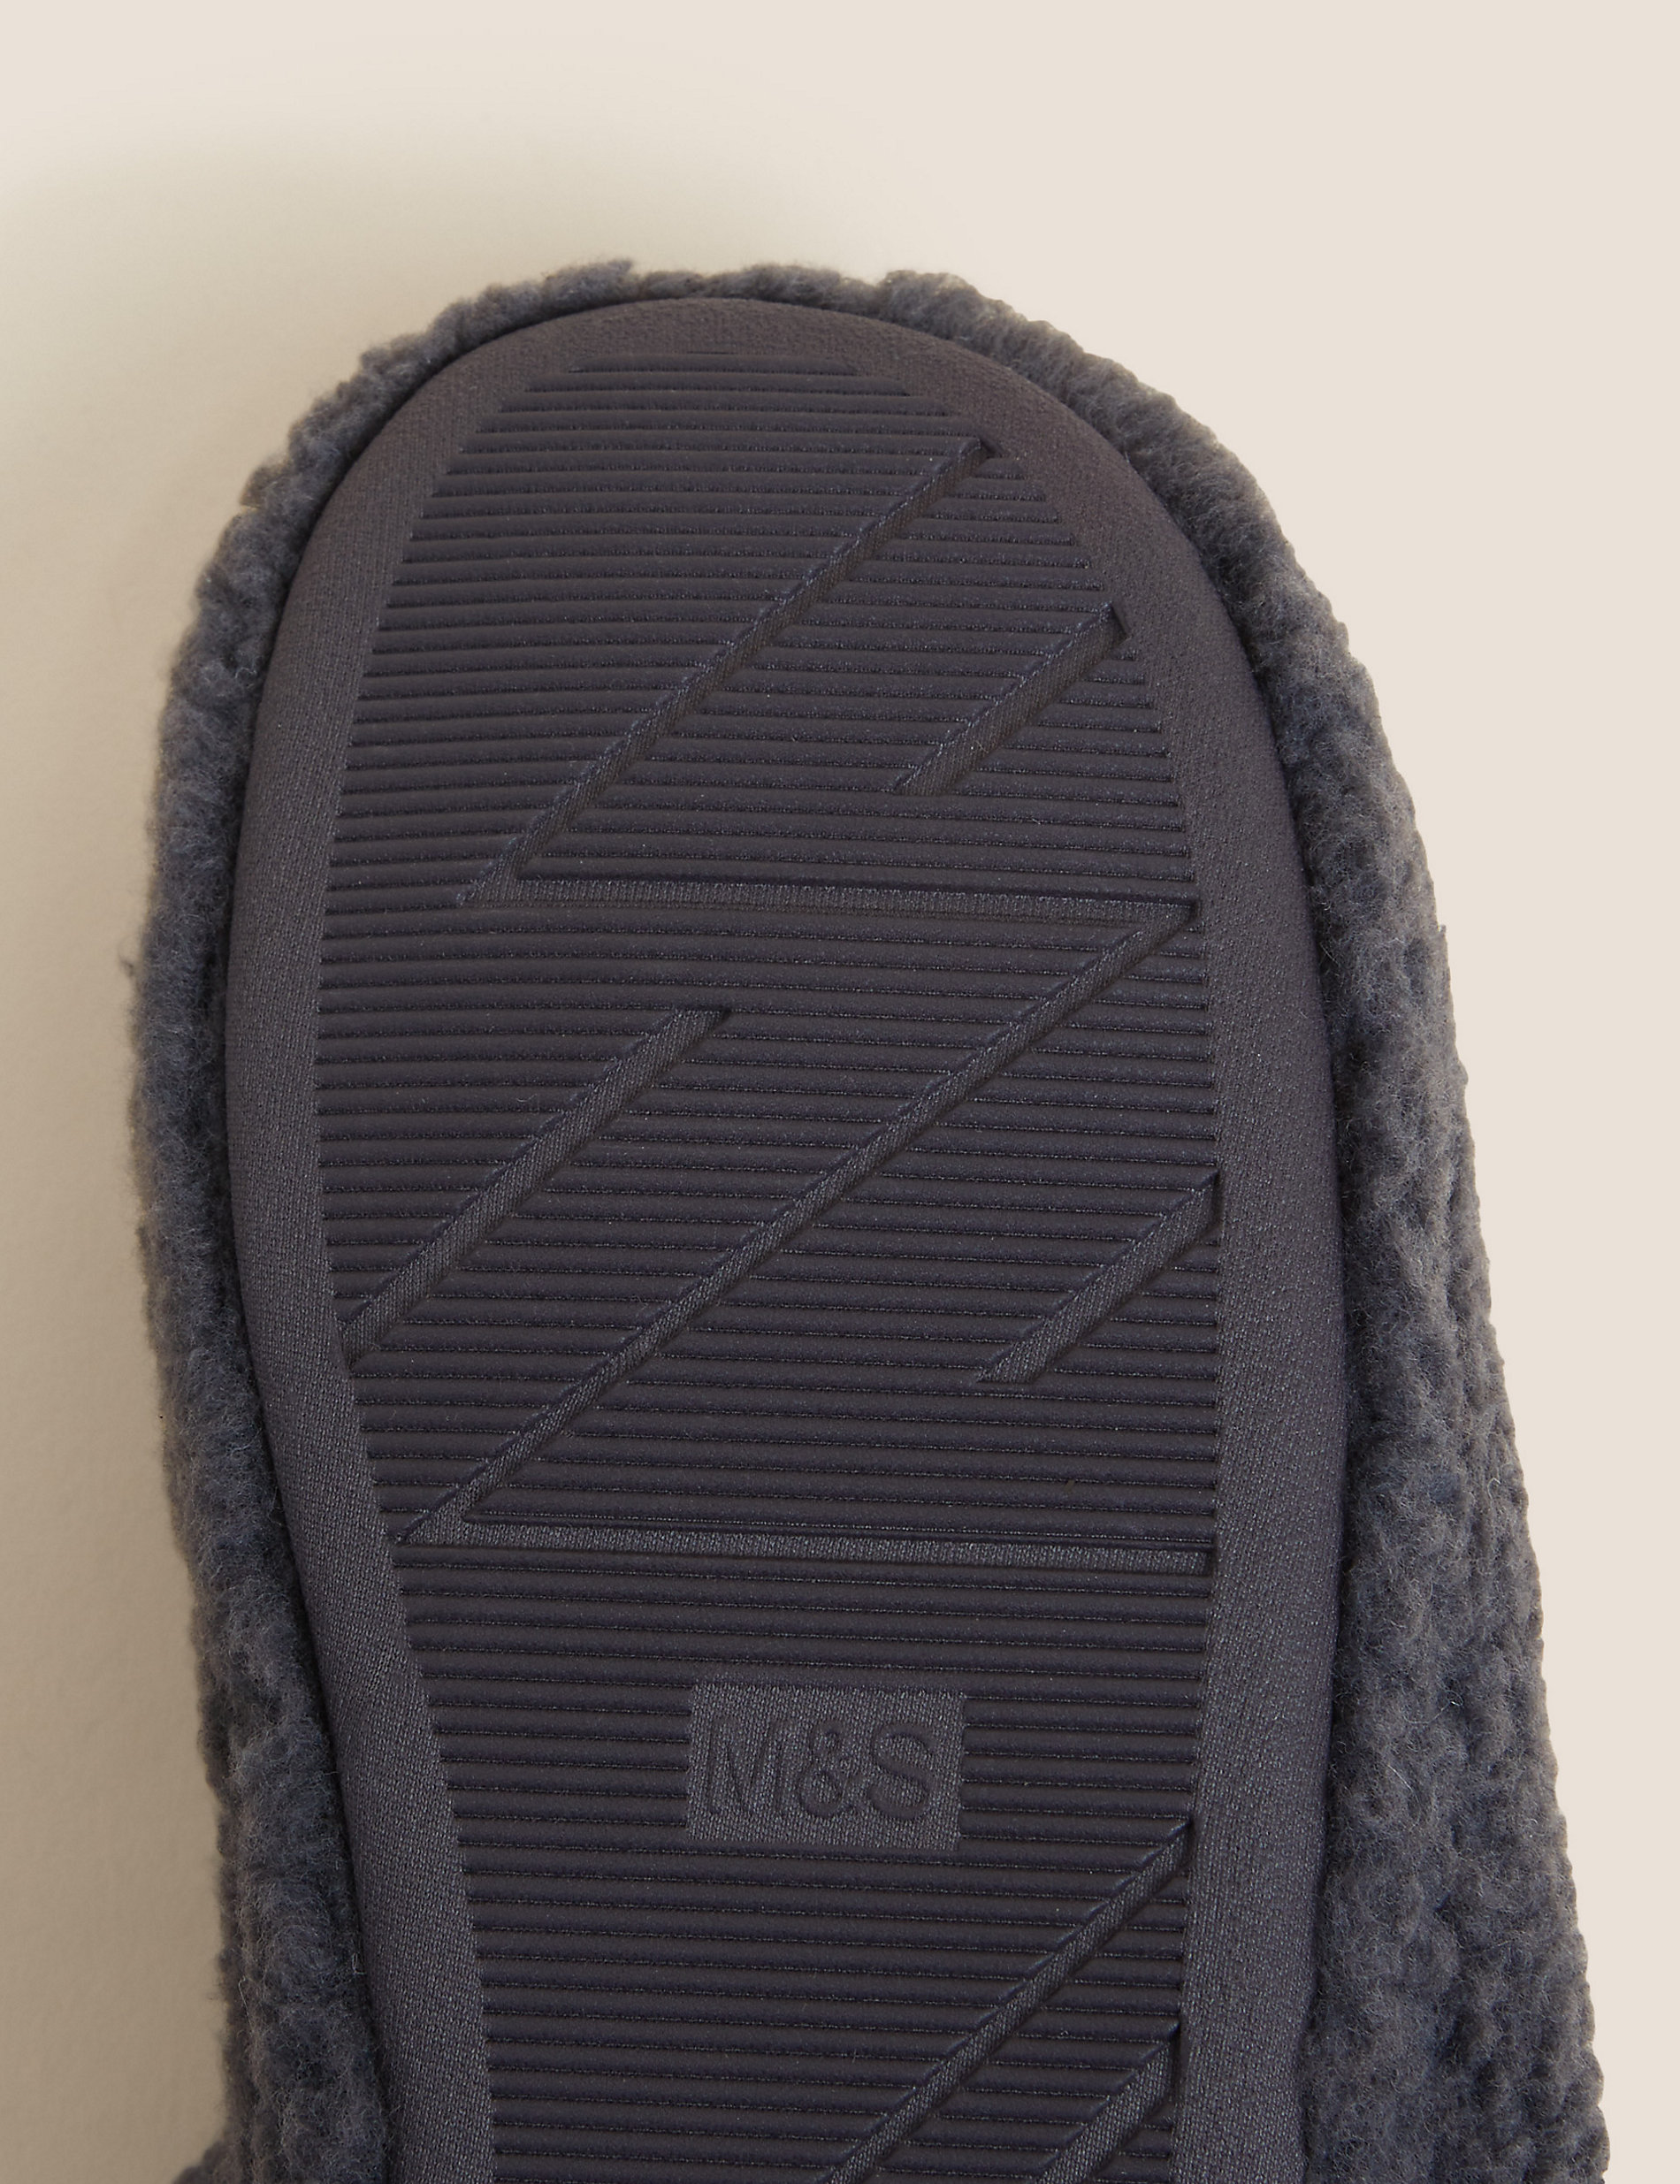 Kids' Slipper Boots (13 Small - 7 Large)